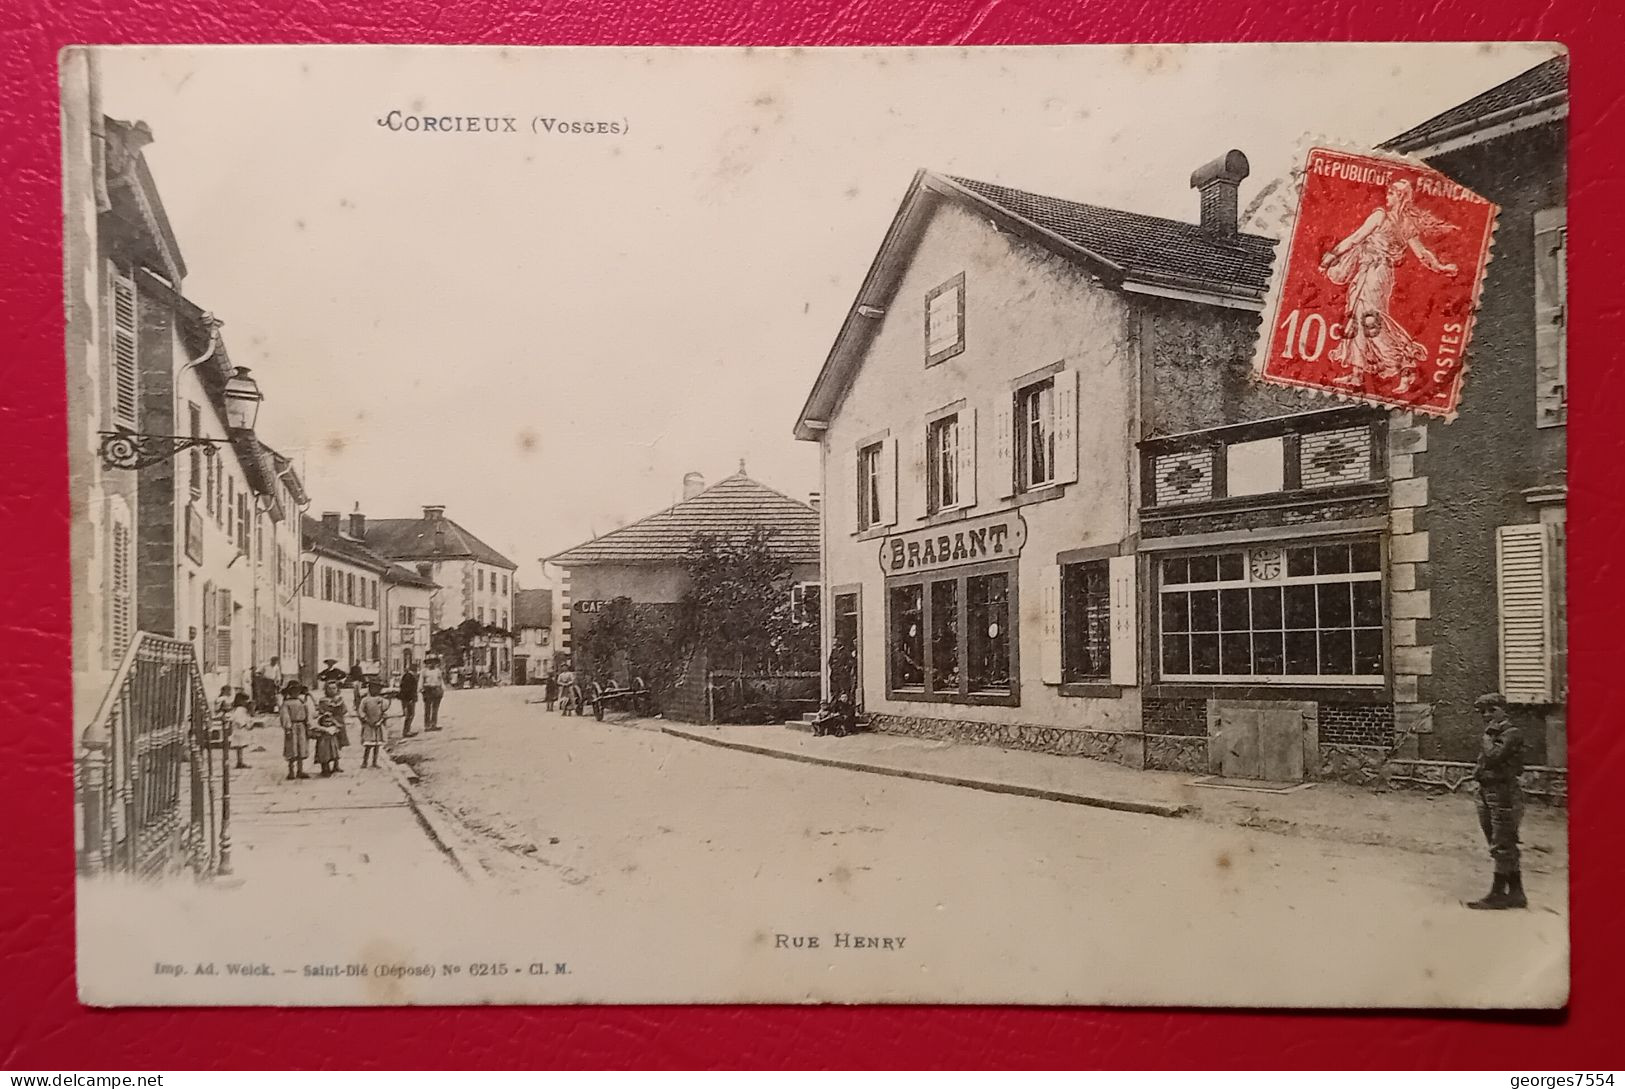 88 - CORCIEUX - RUE HENRY - Corcieux